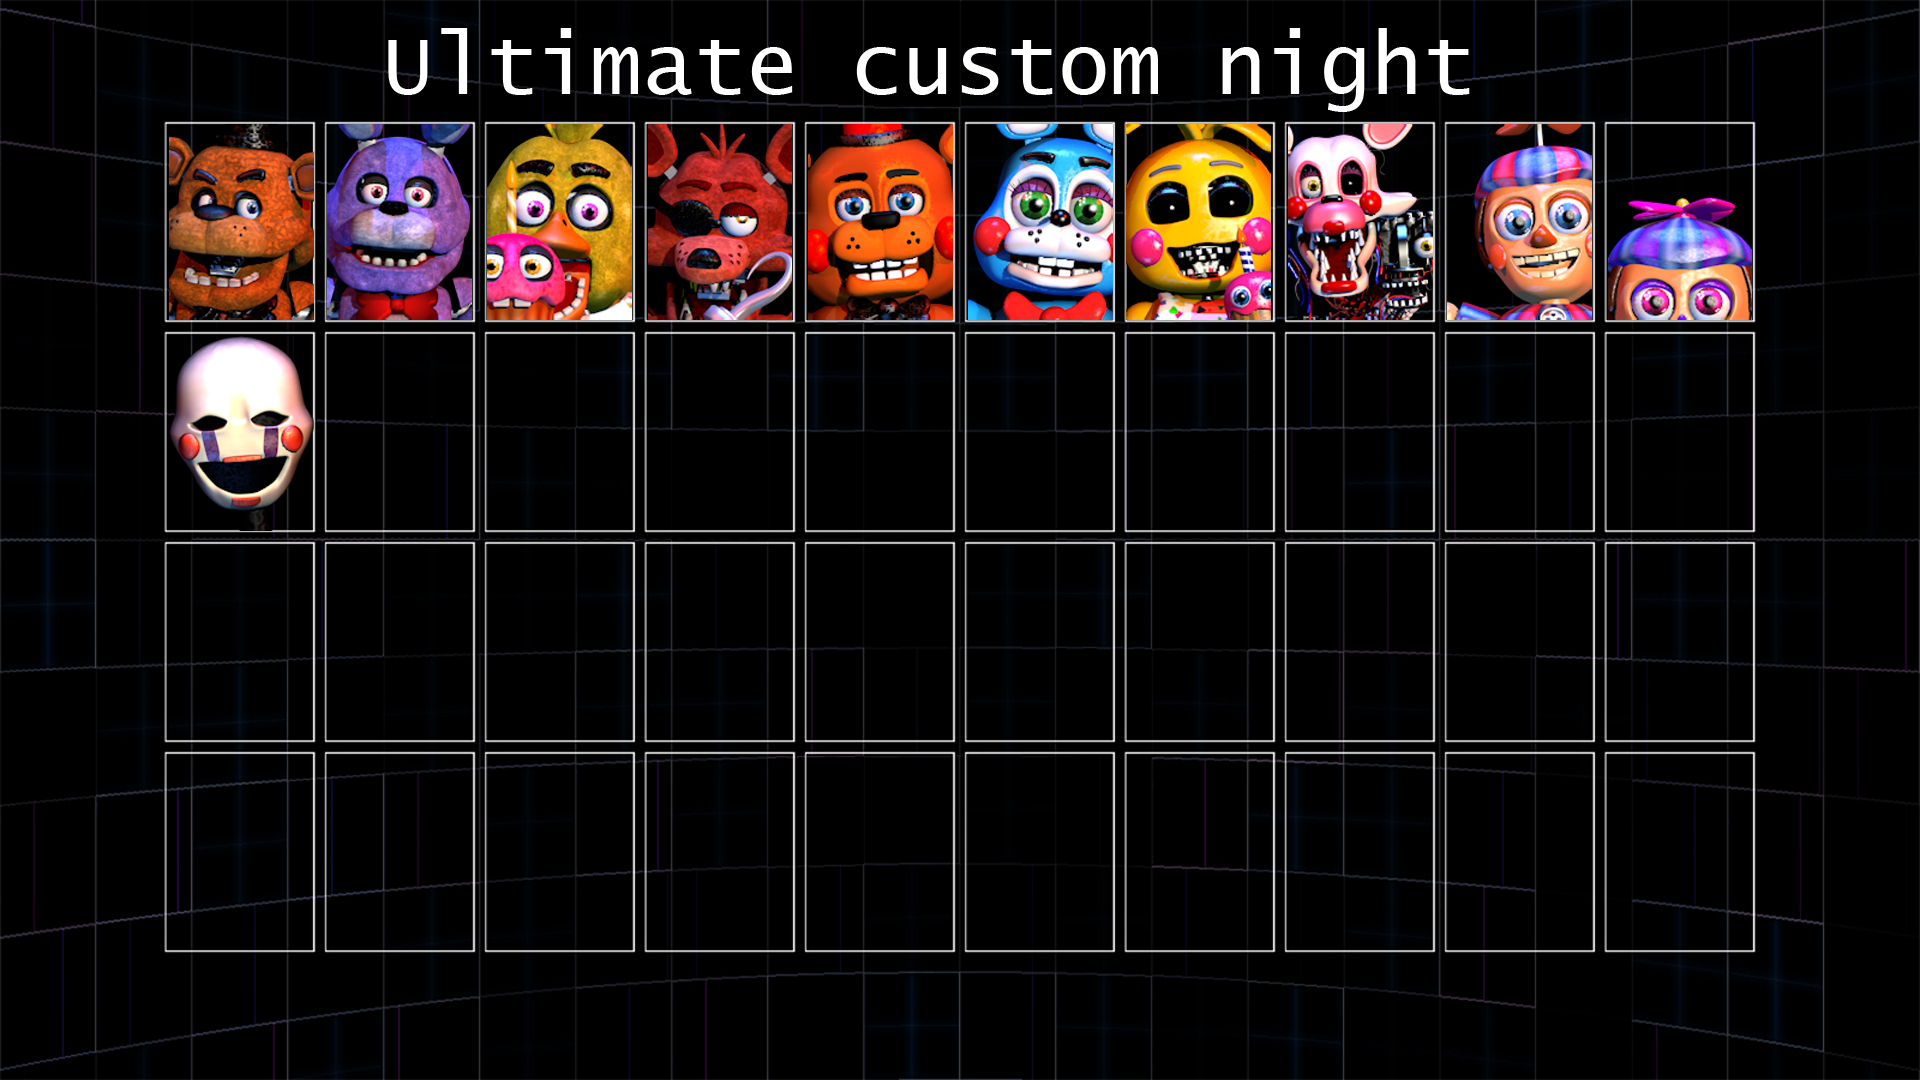 The Complete Ultimate Custom Night Version 4 by Will220 on DeviantArt